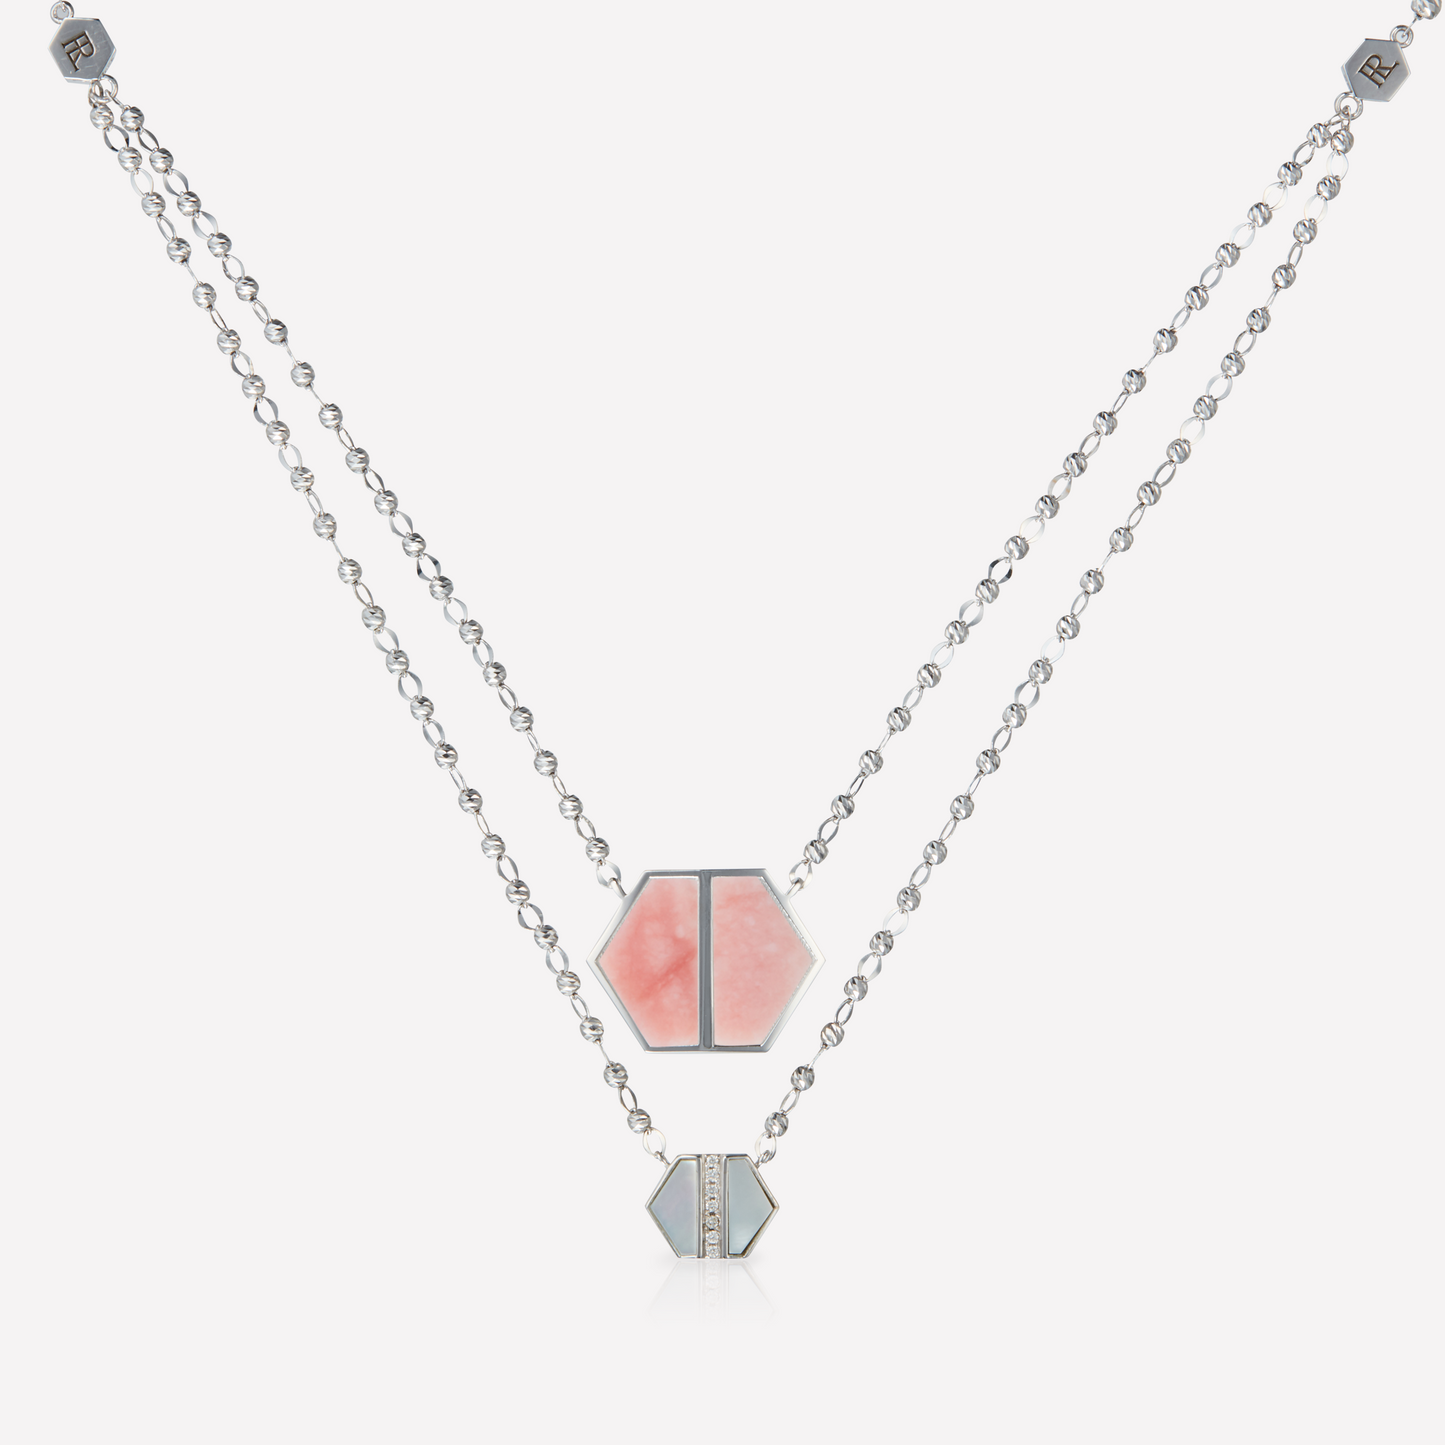 VOID Filled By You Necklace, Large, Pink Opal, Diamond S